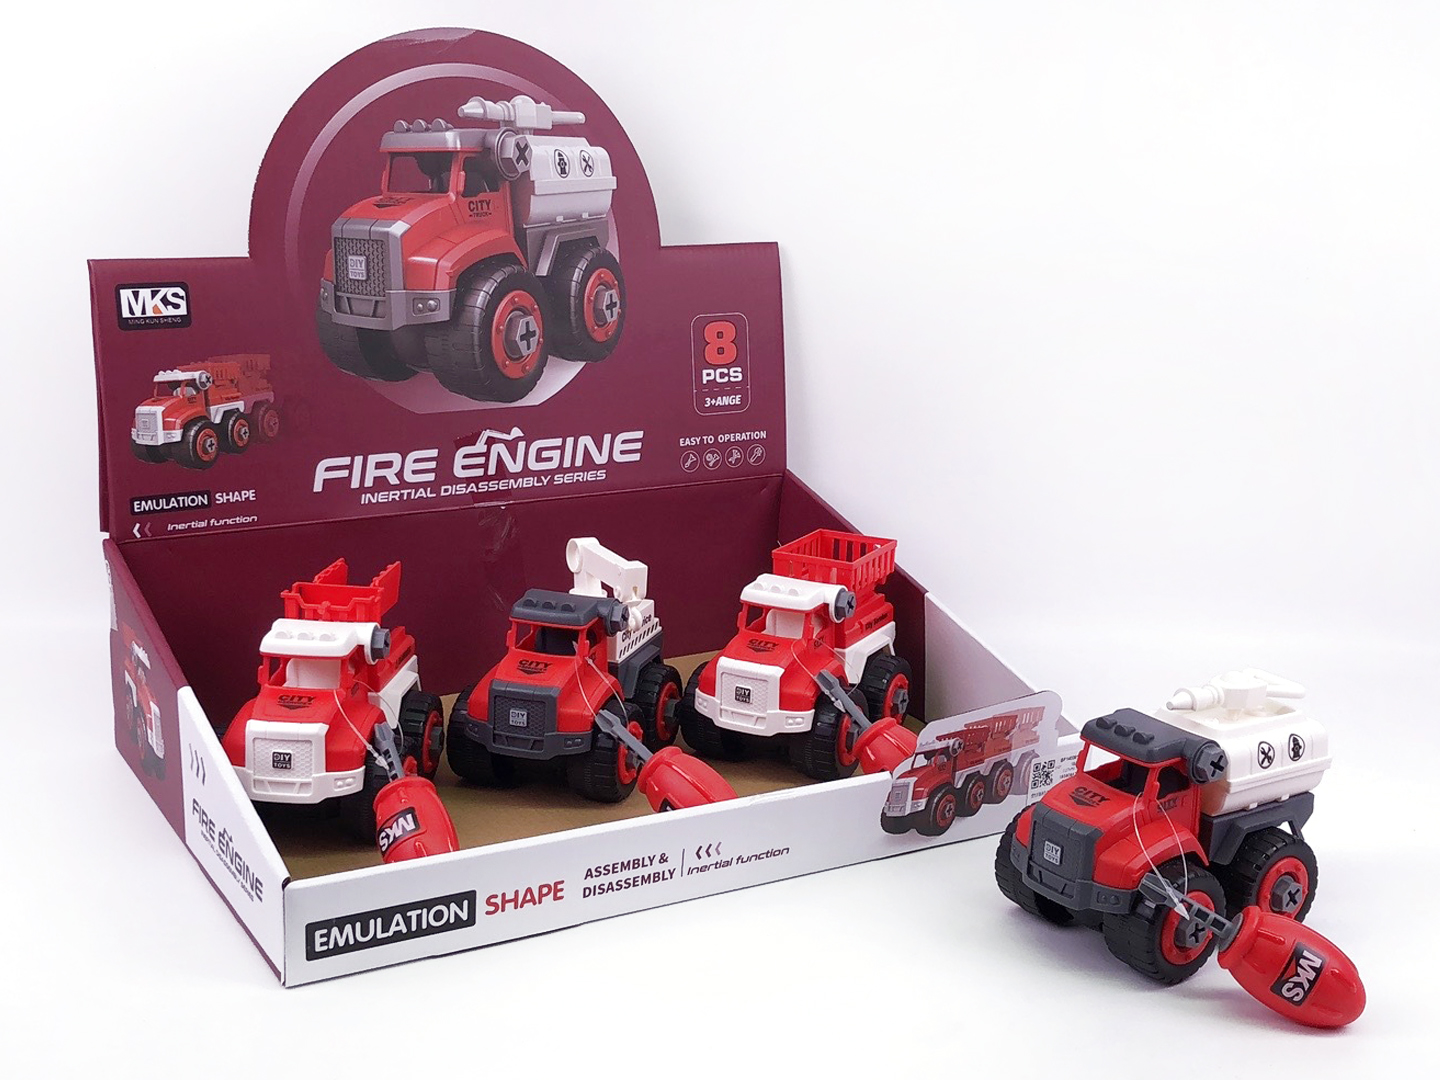 Friction Diy Fire Engine(8in1) toys